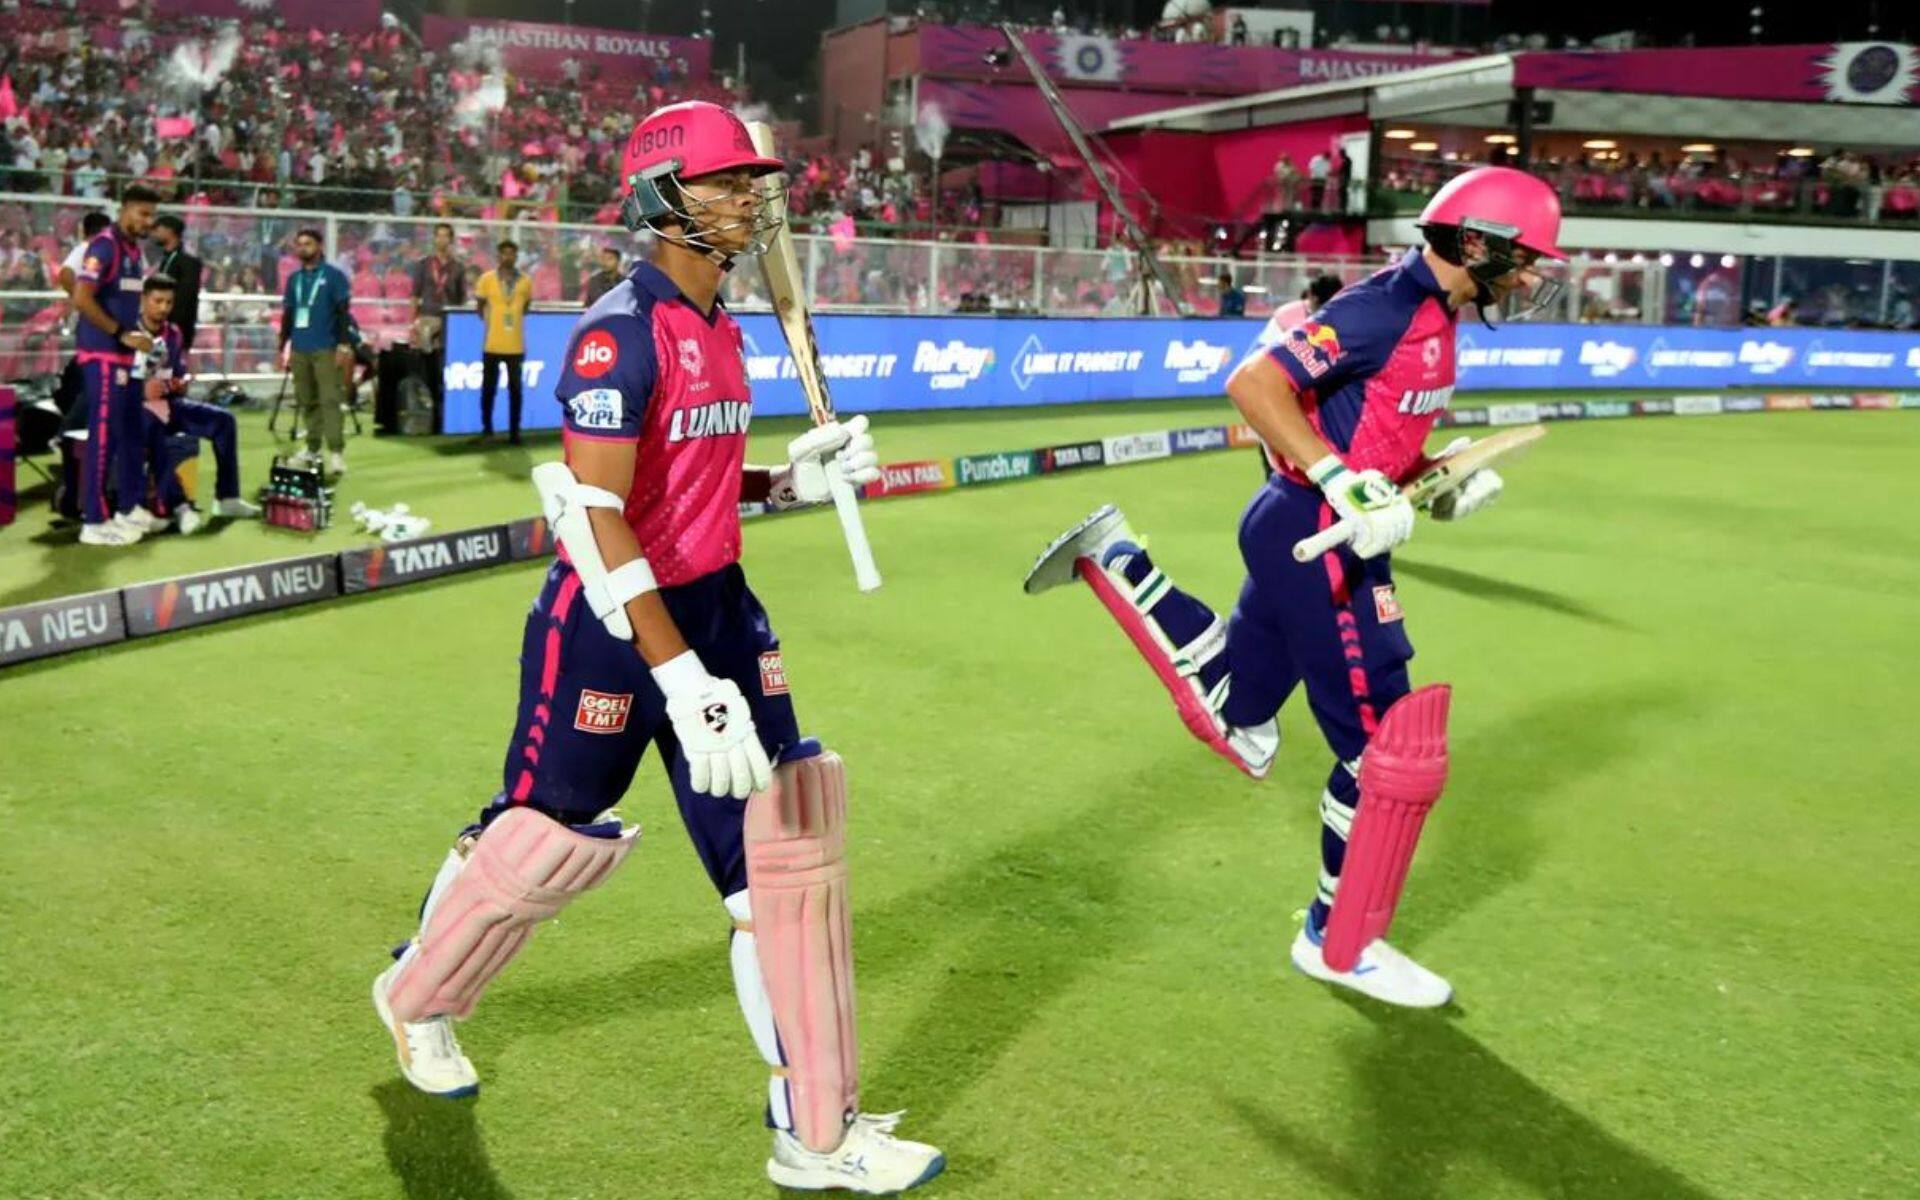 Yashasvi Jaiswal and Jos Buttler walking out to bat against the Delhi Capitals [iplt20.com]